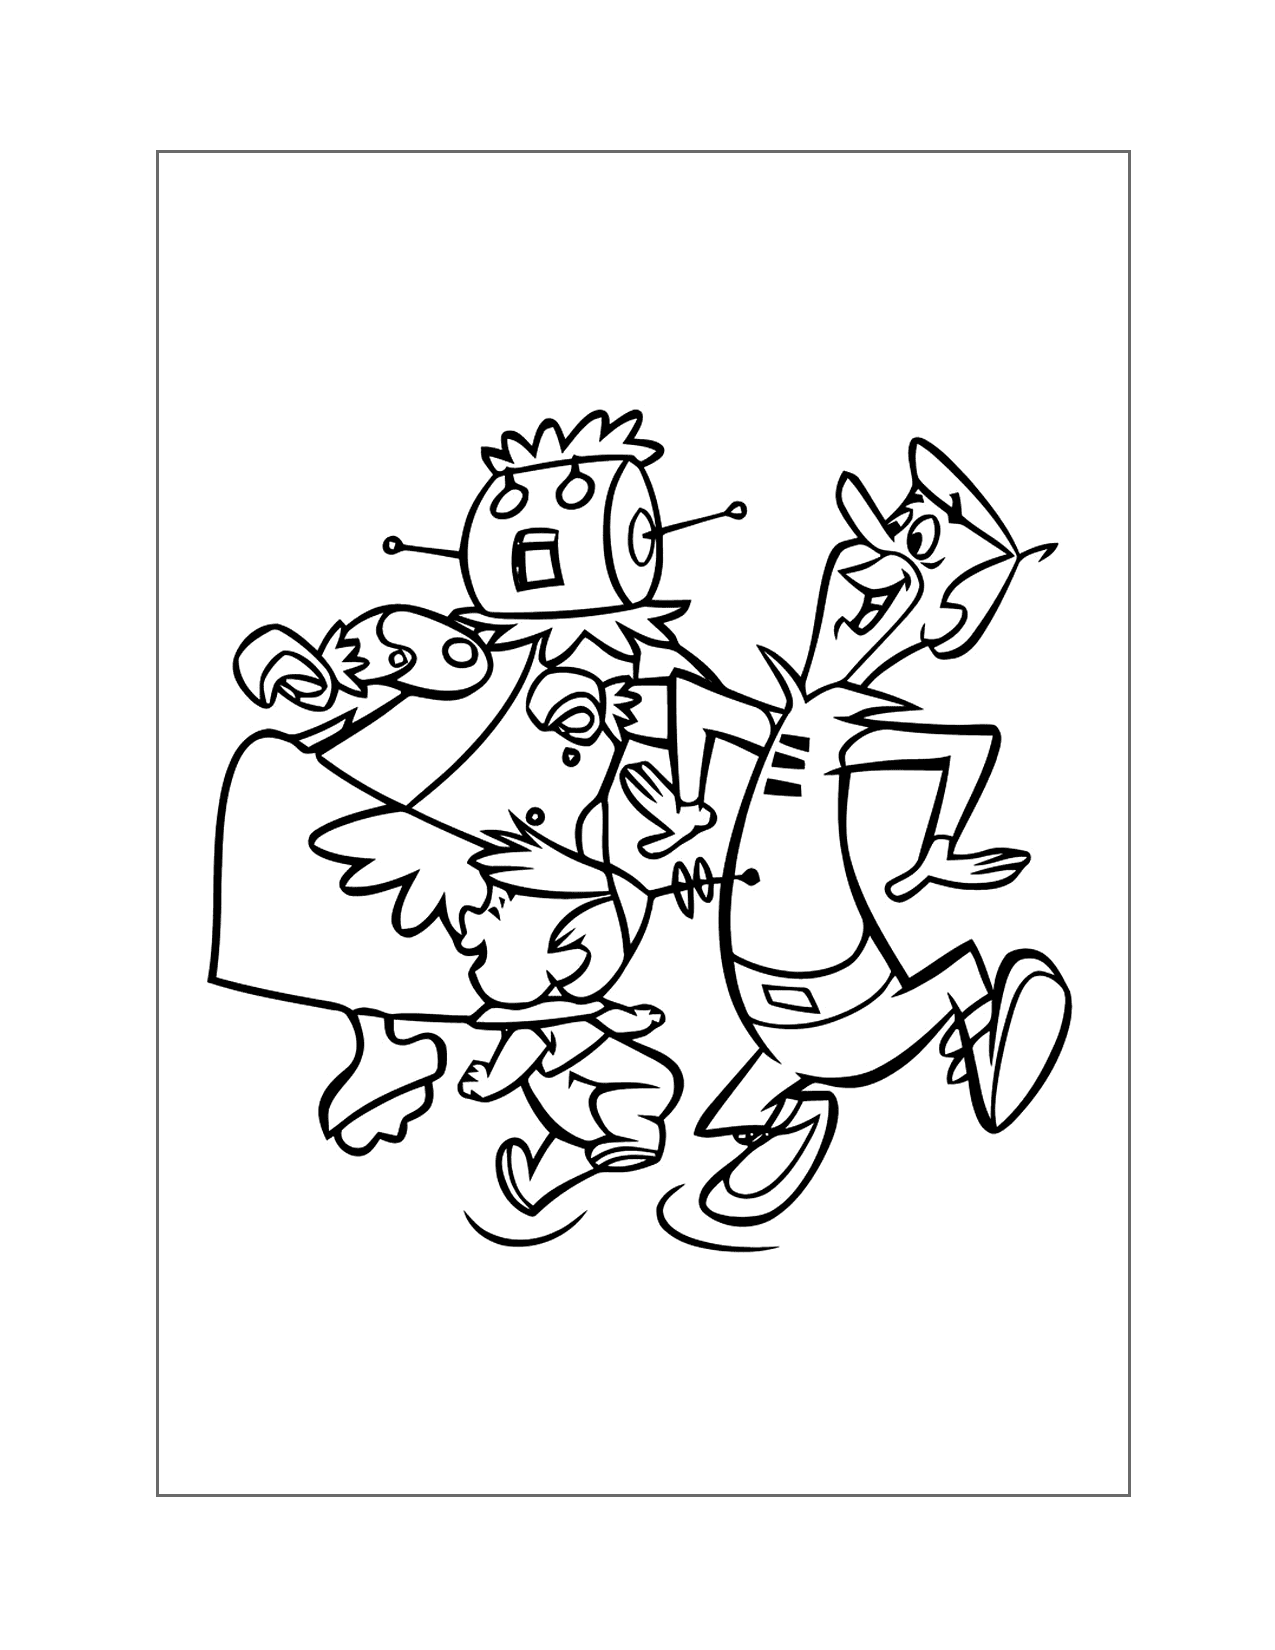 Elroy Rosie And George Jetson Dancing Coloring Page